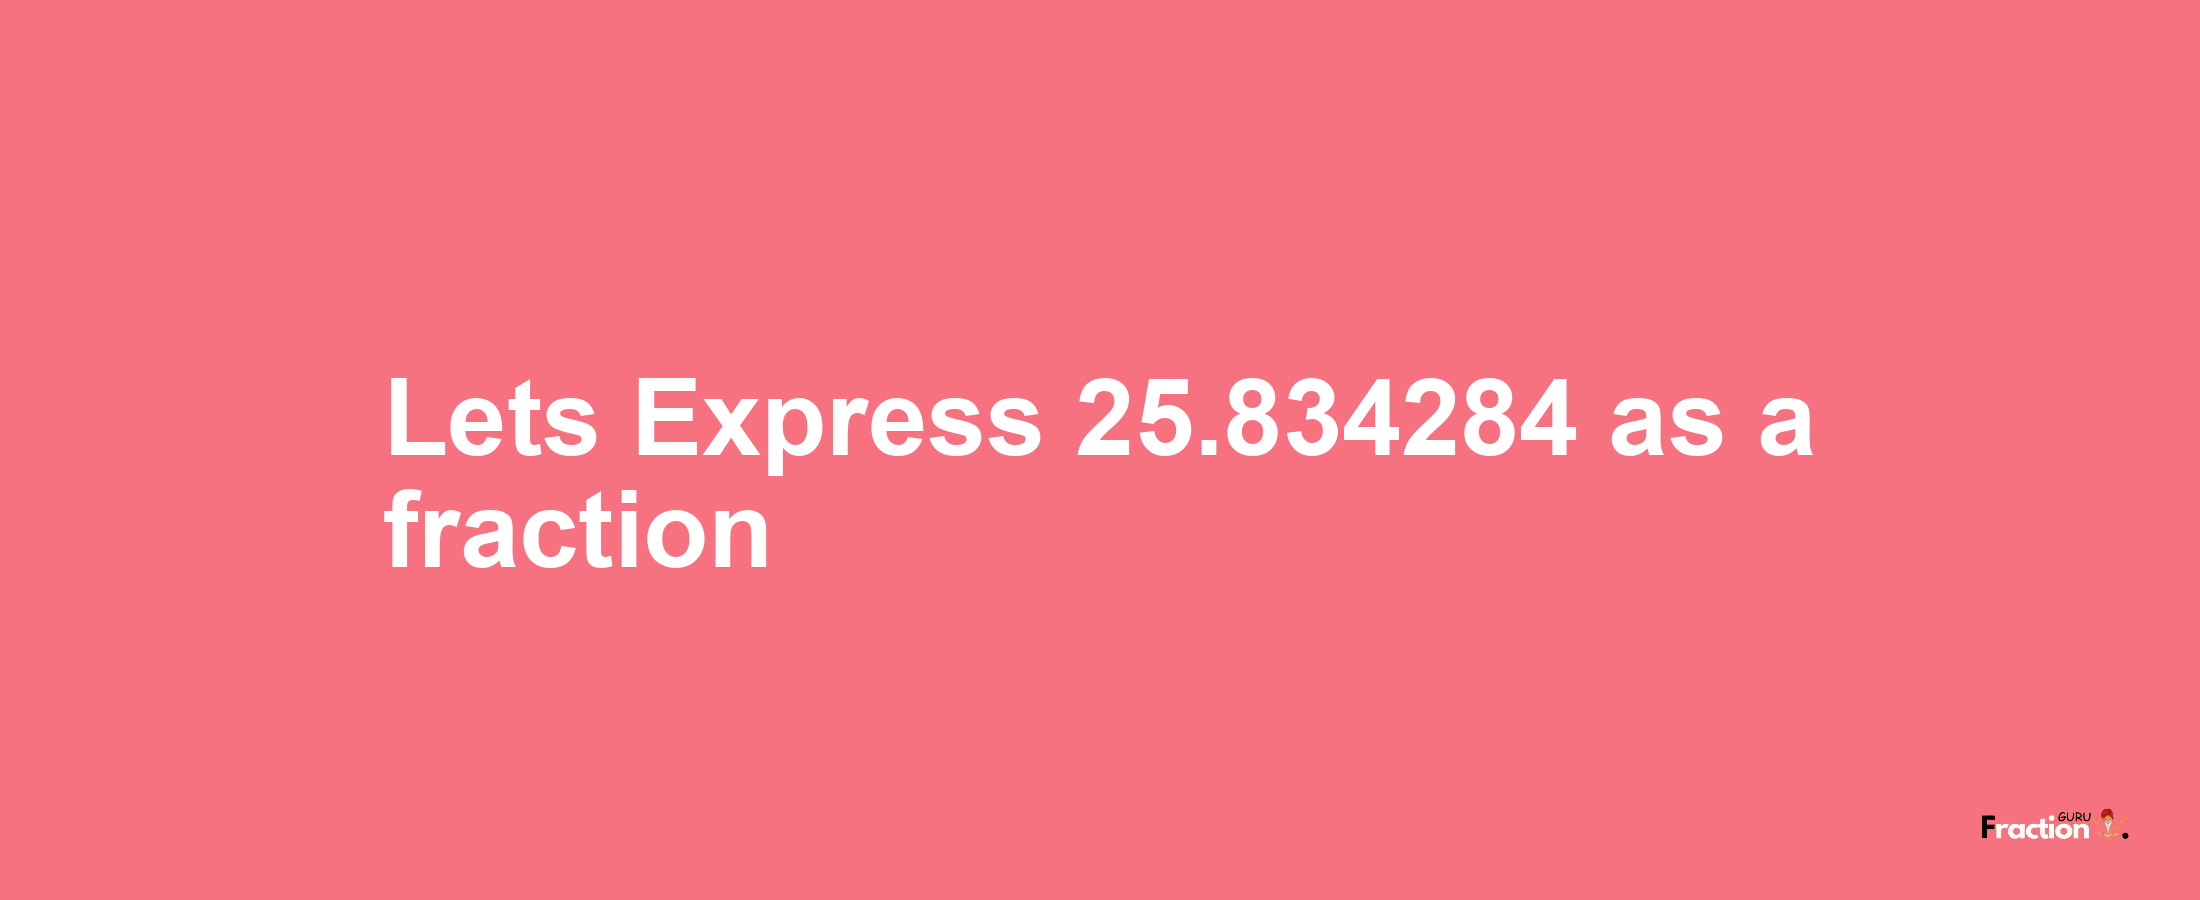 Lets Express 25.834284 as afraction